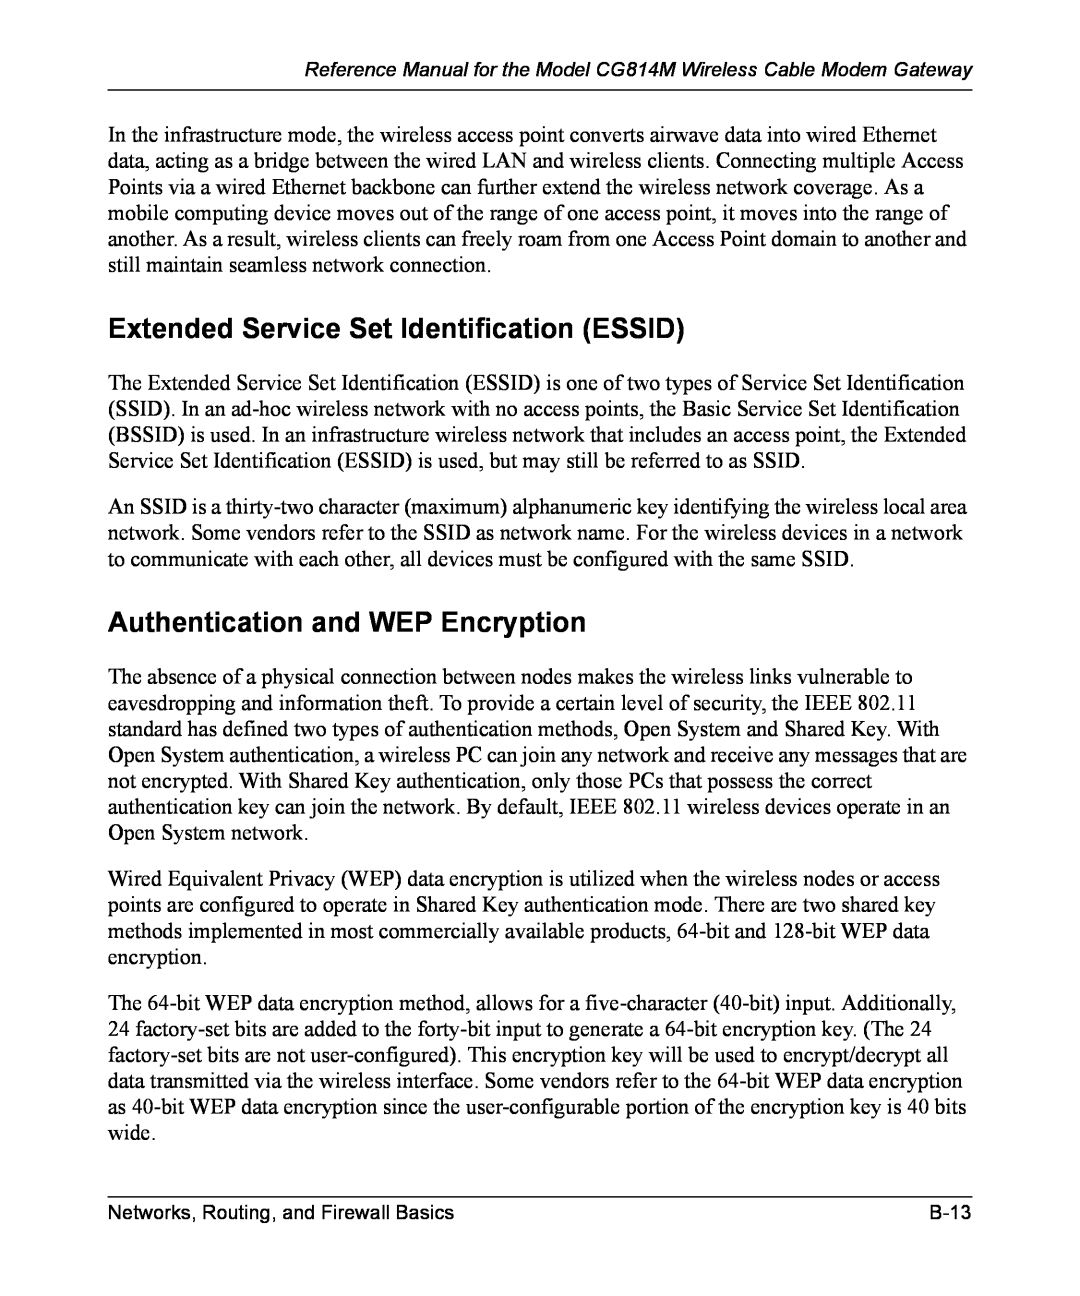 NETGEAR CG814M manual Extended Service Set Identification ESSID, Authentication and WEP Encryption 